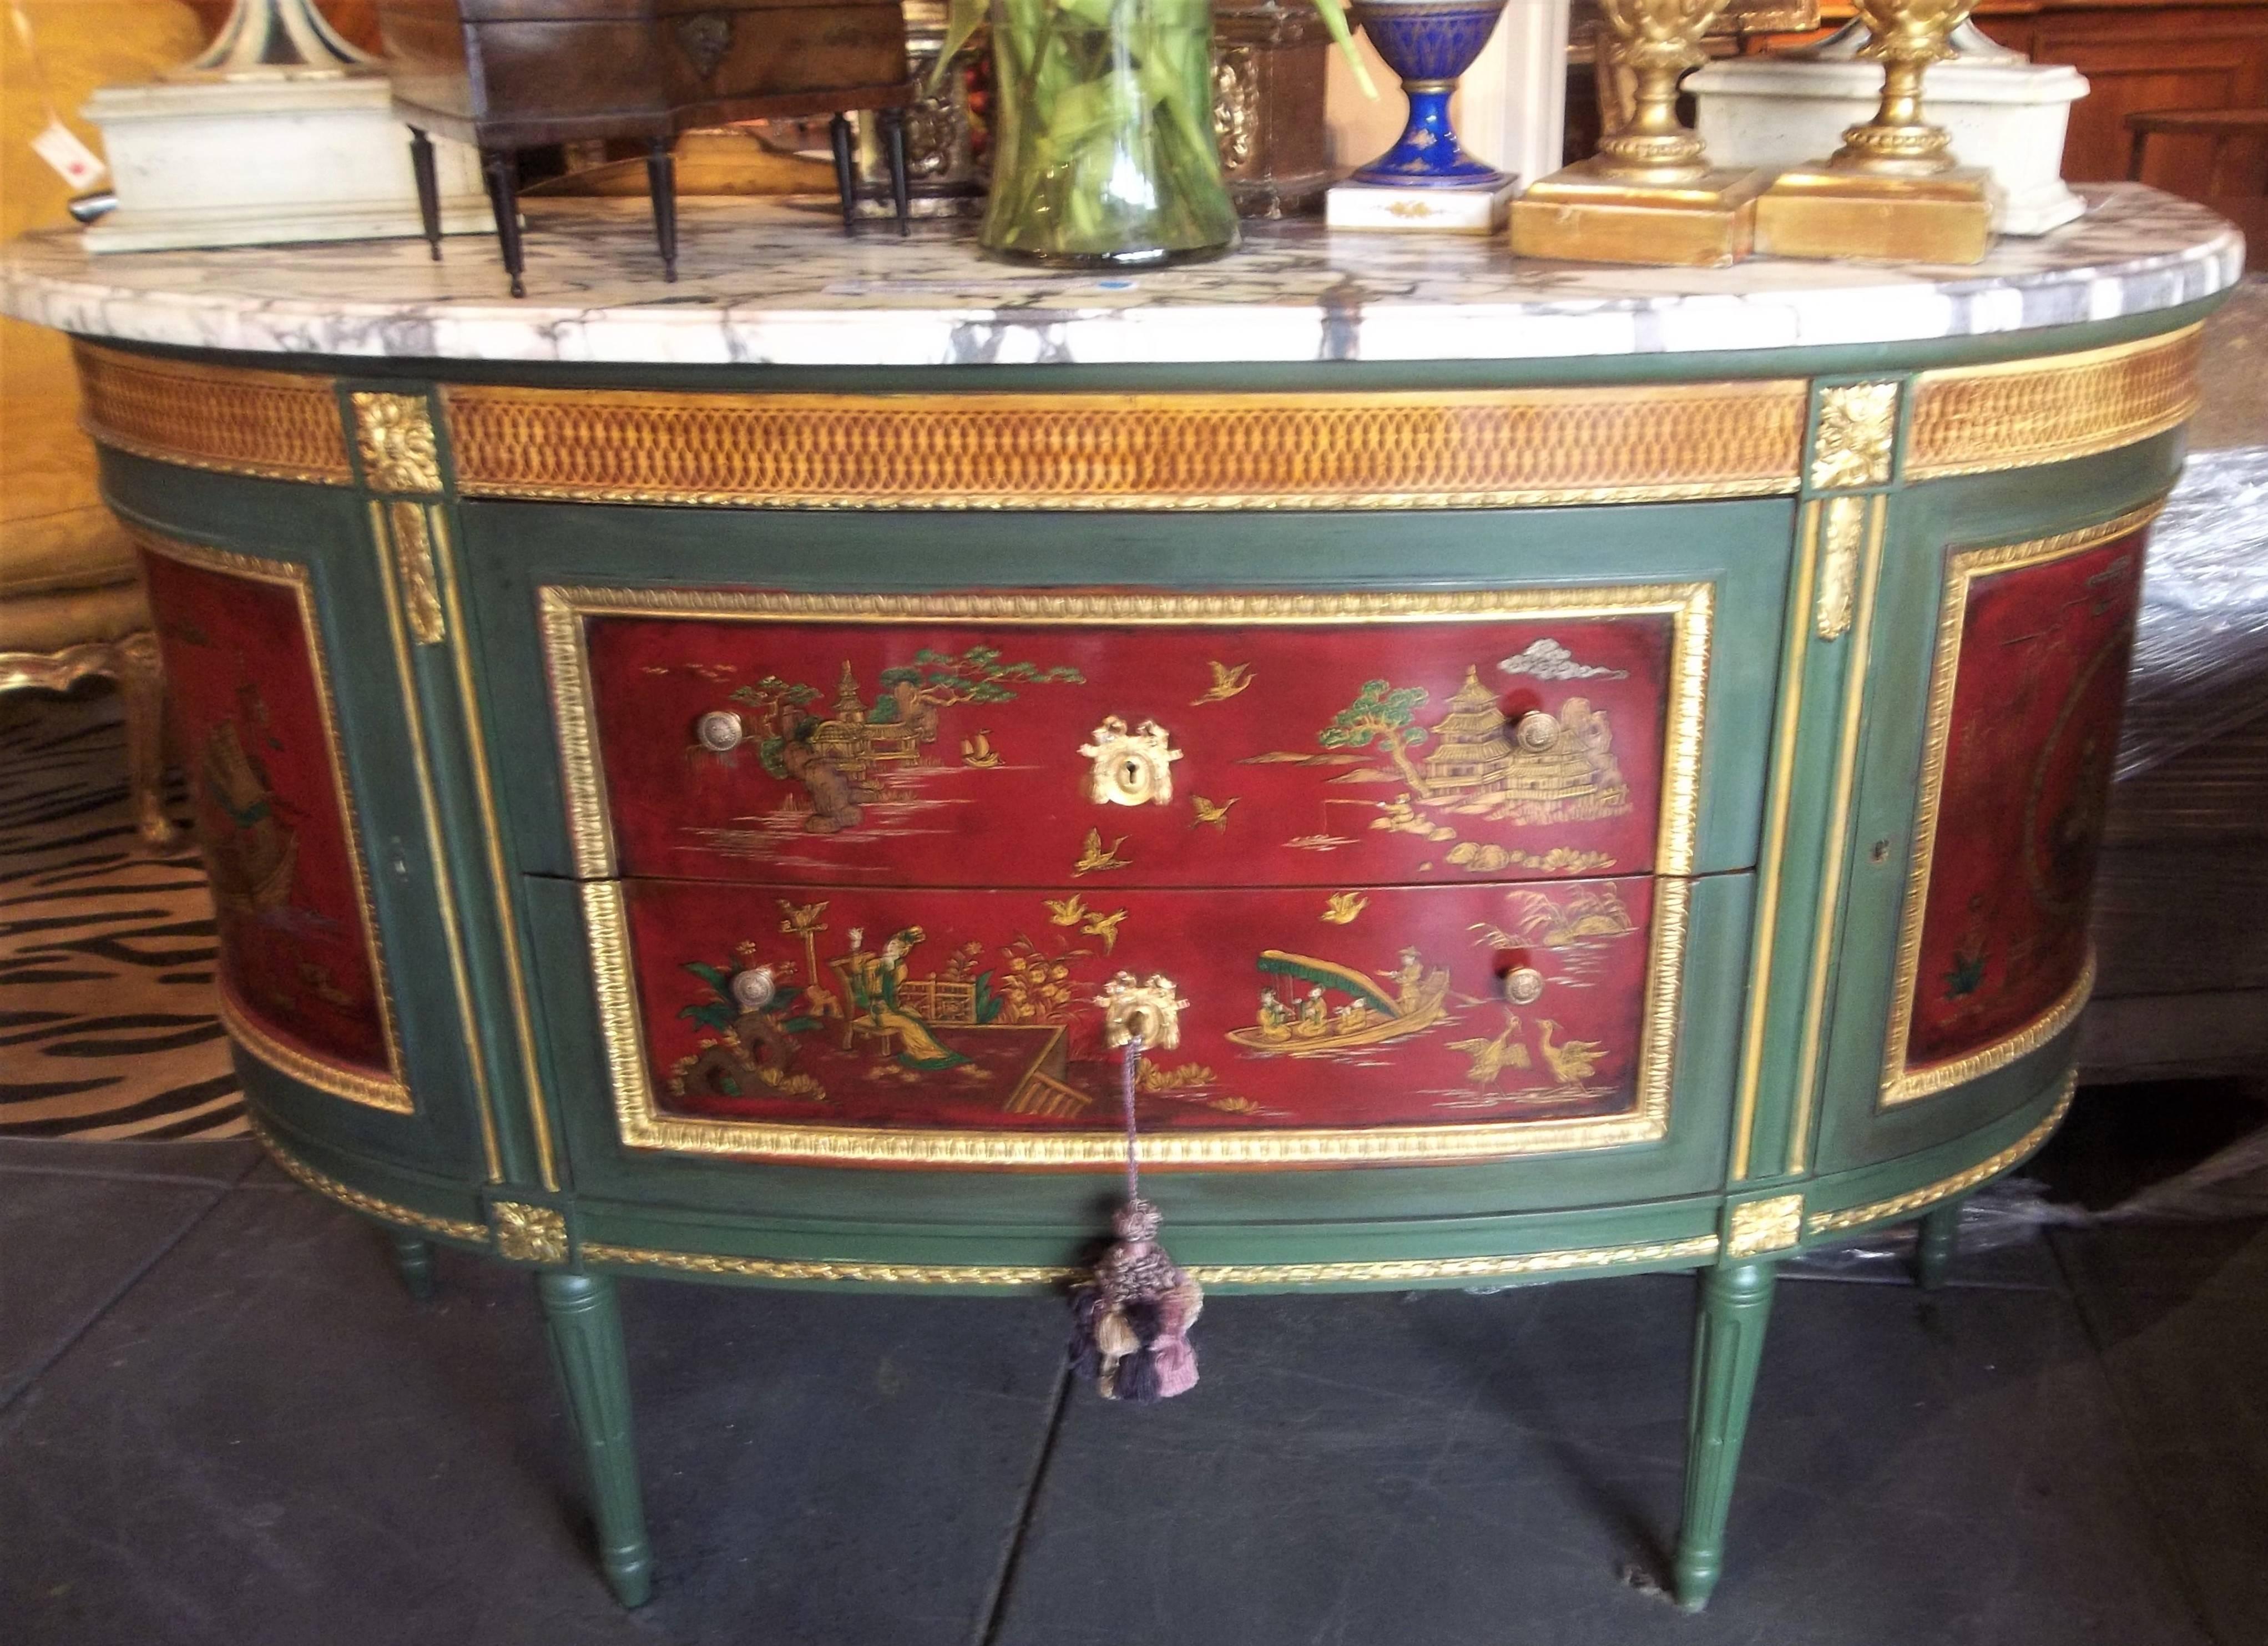 20th Century French Green Painted Console Dessert with Chinoiserie Panels